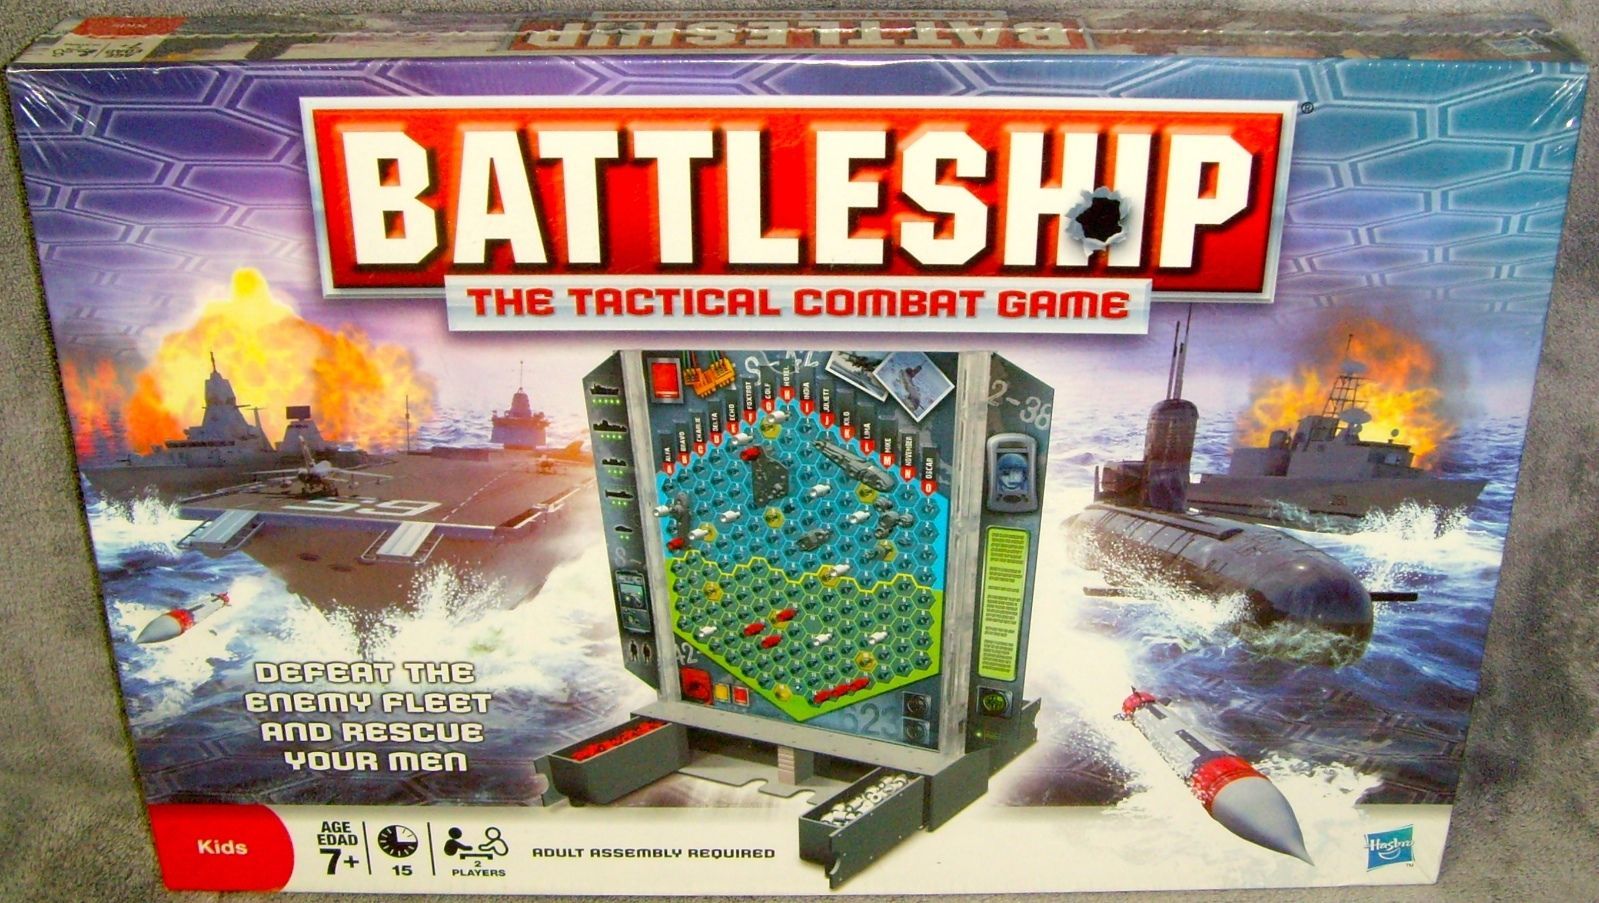 Games to Go-Battleship-The Tactical Combat Game 2010